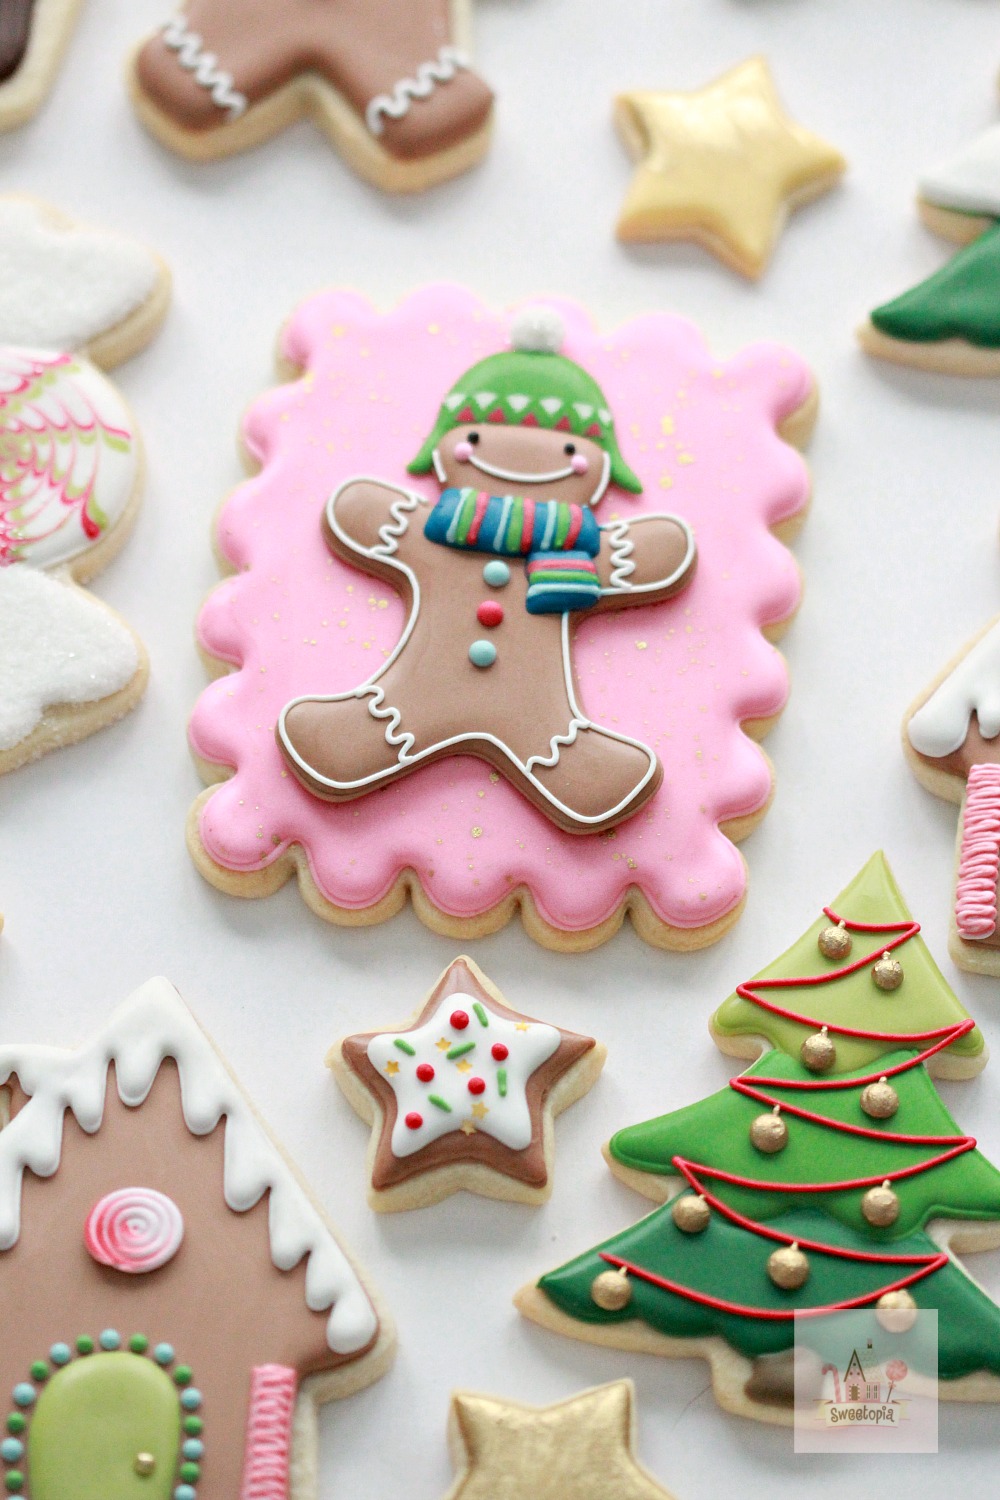 Royal Icing Cookie Decorating Tips | Sweetopia